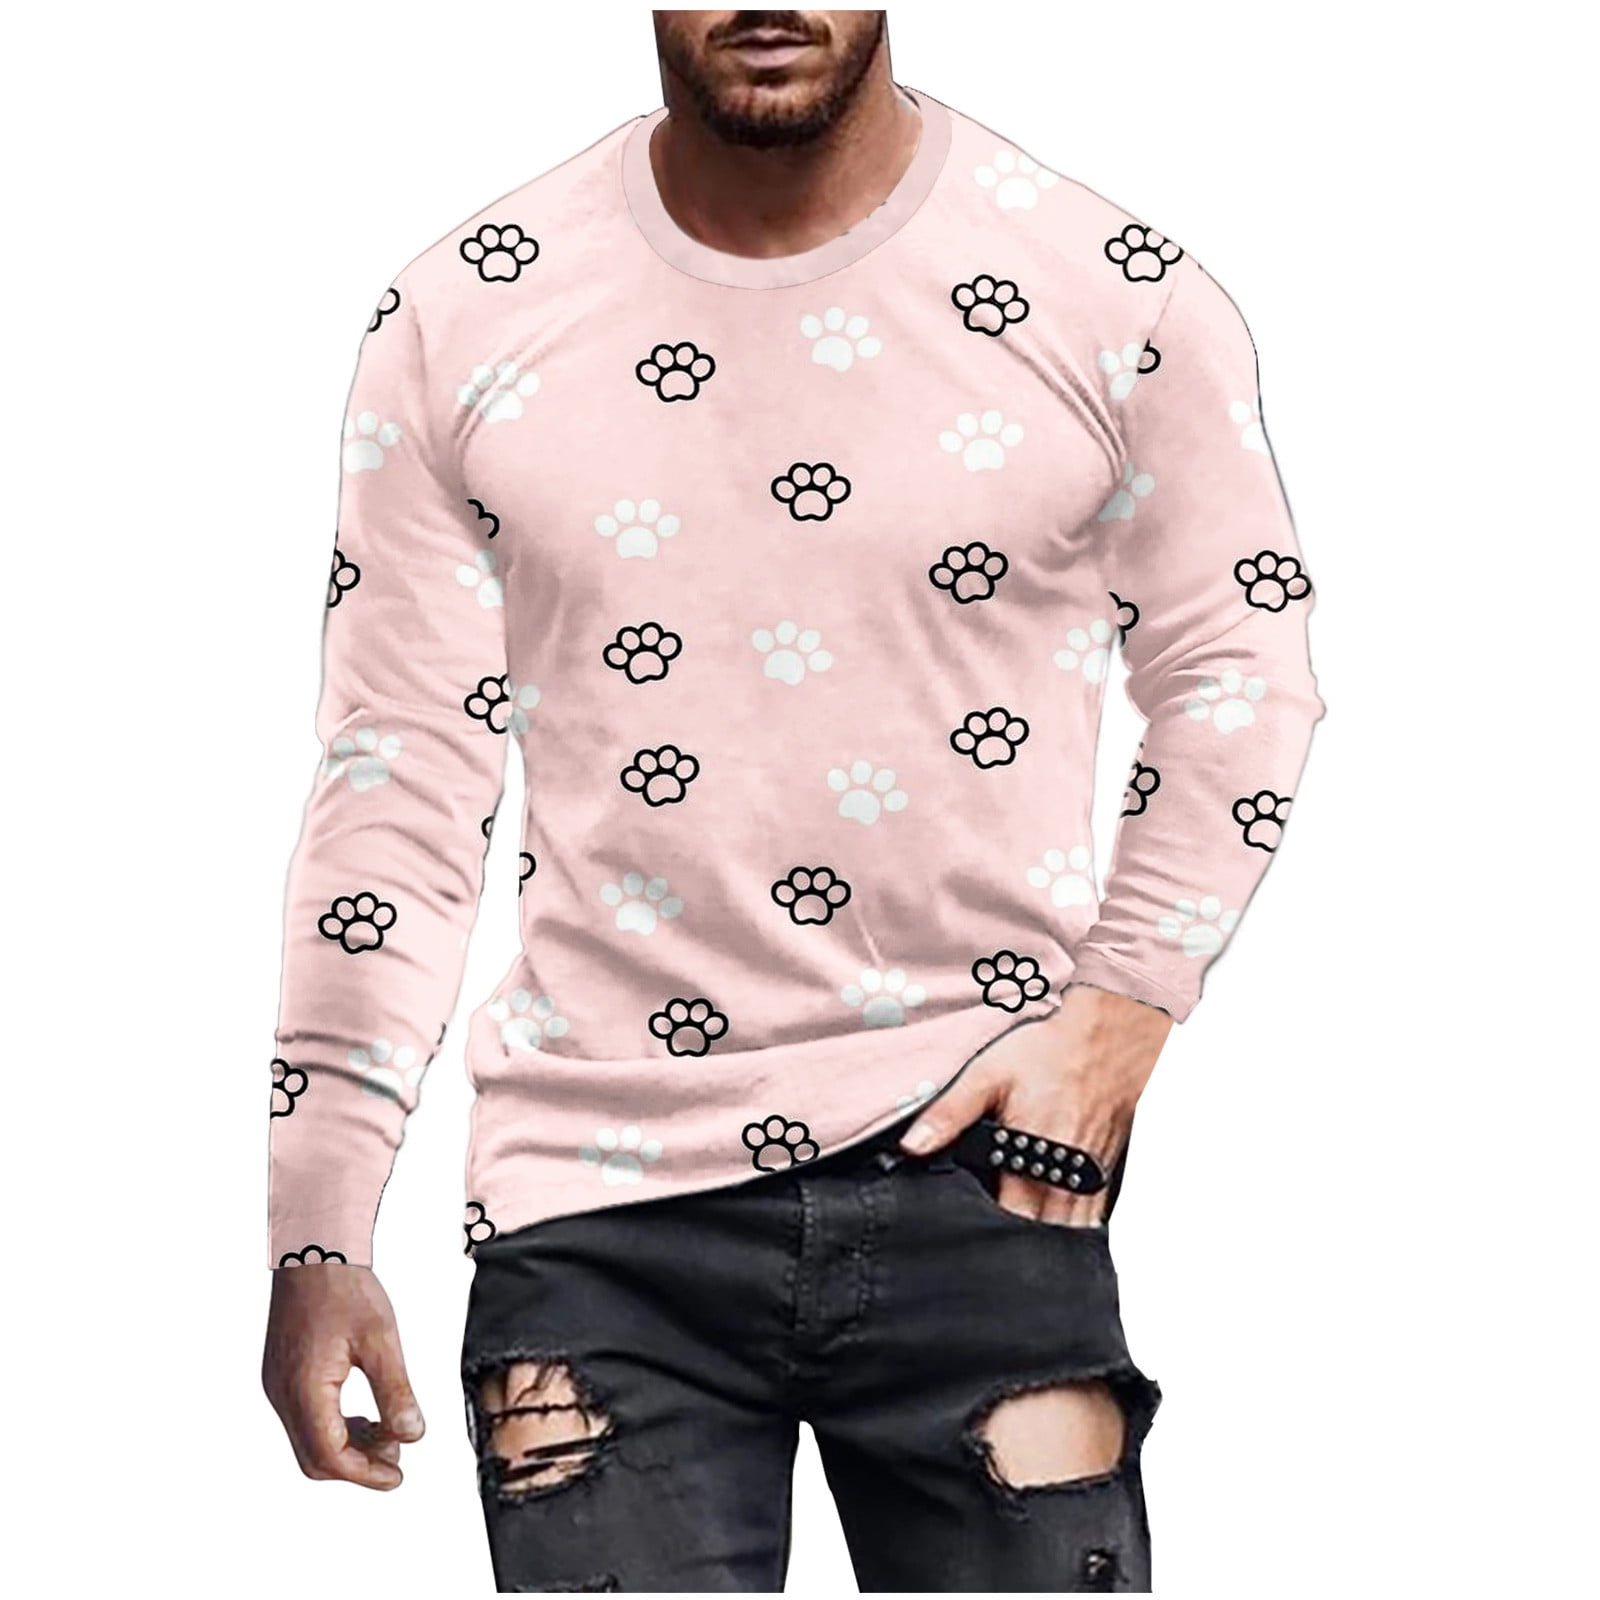 ZCFZJW Long Sleeve Mens Big and Tall Graphic Tee Shirts Cute Dog Paw Print  Round Neck Pullover Sweatshirts Casual Slim Fitted Basic Hawaiian T-Shirts  Pink M 